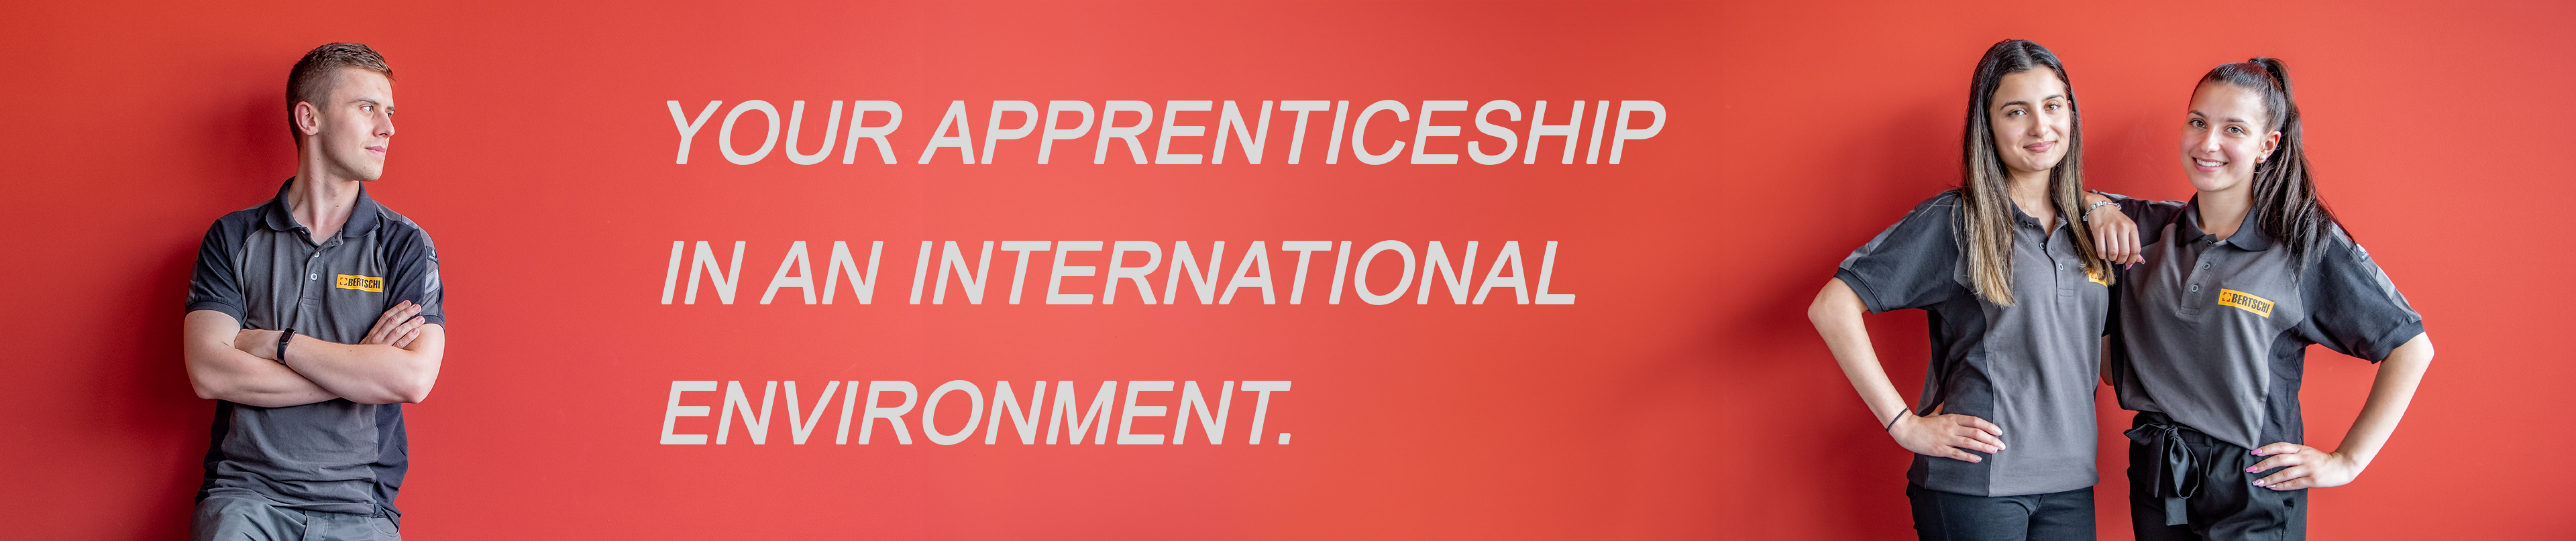 red wall with 3 apprentices standing and the text says "your apprenticeship in an international environment"